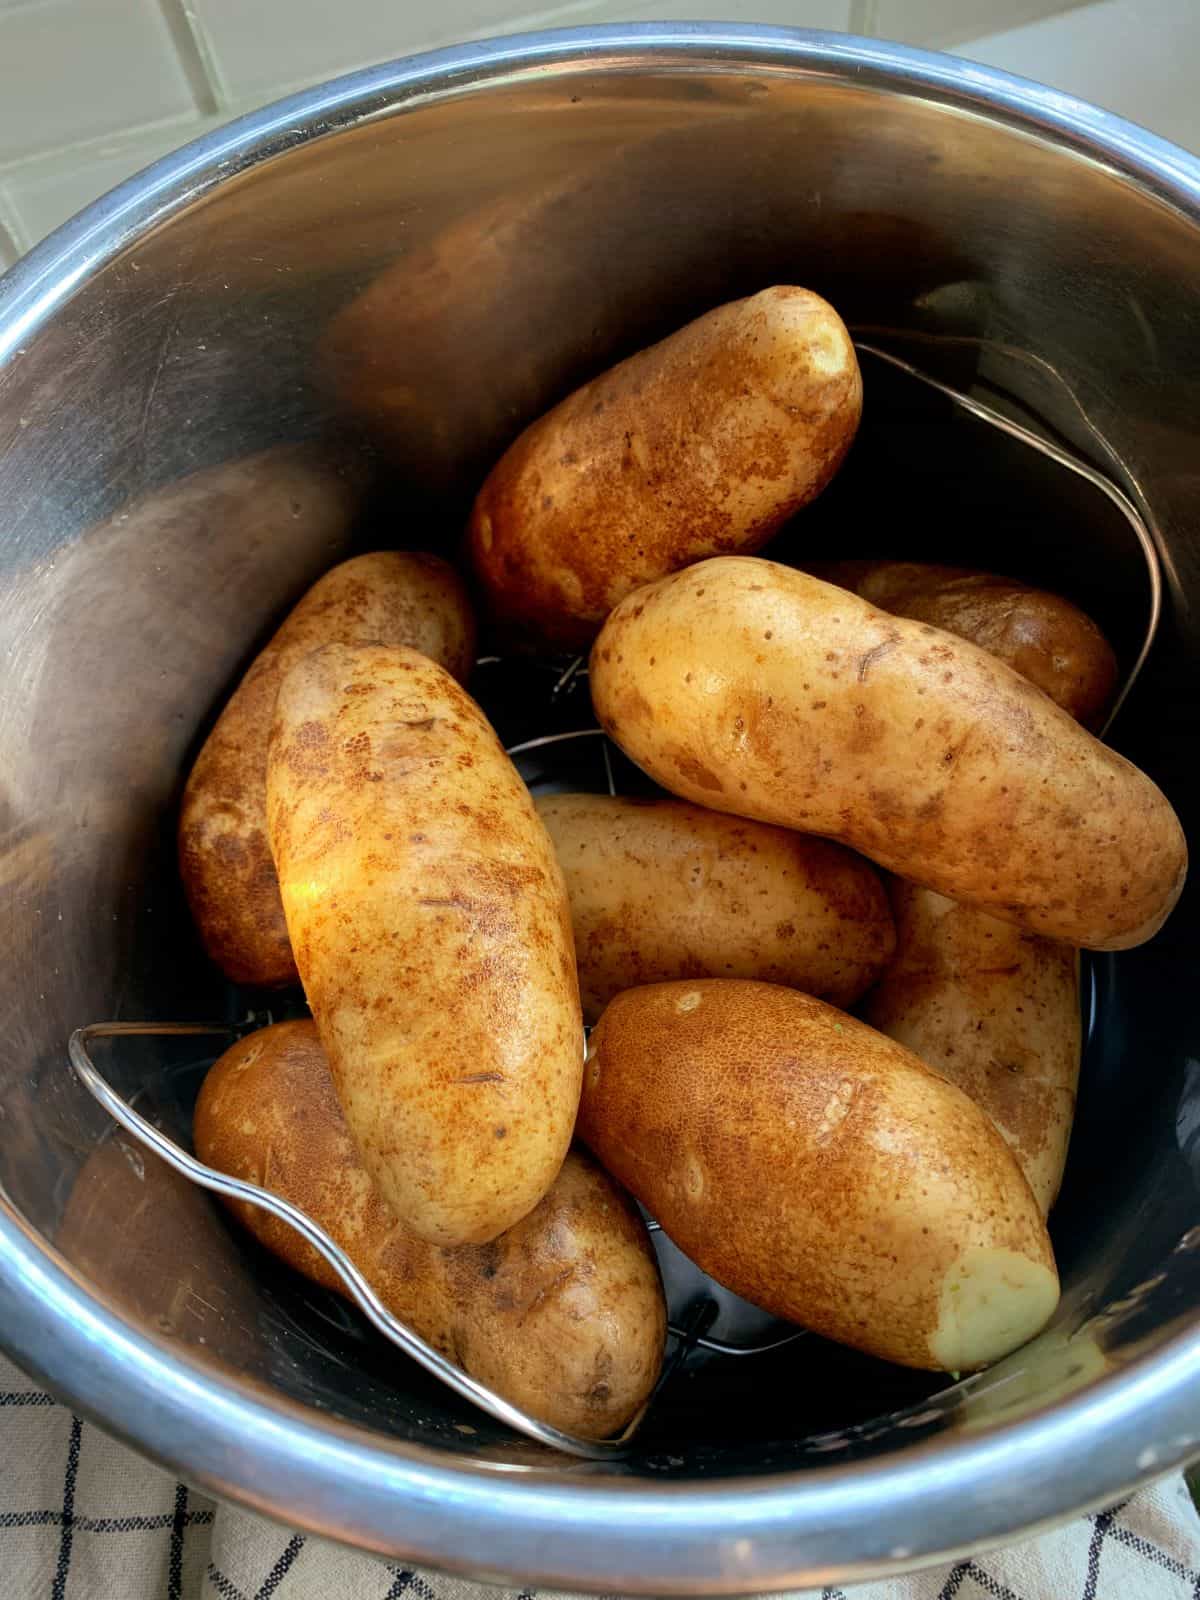 Washed potatoes ready to be cooked.